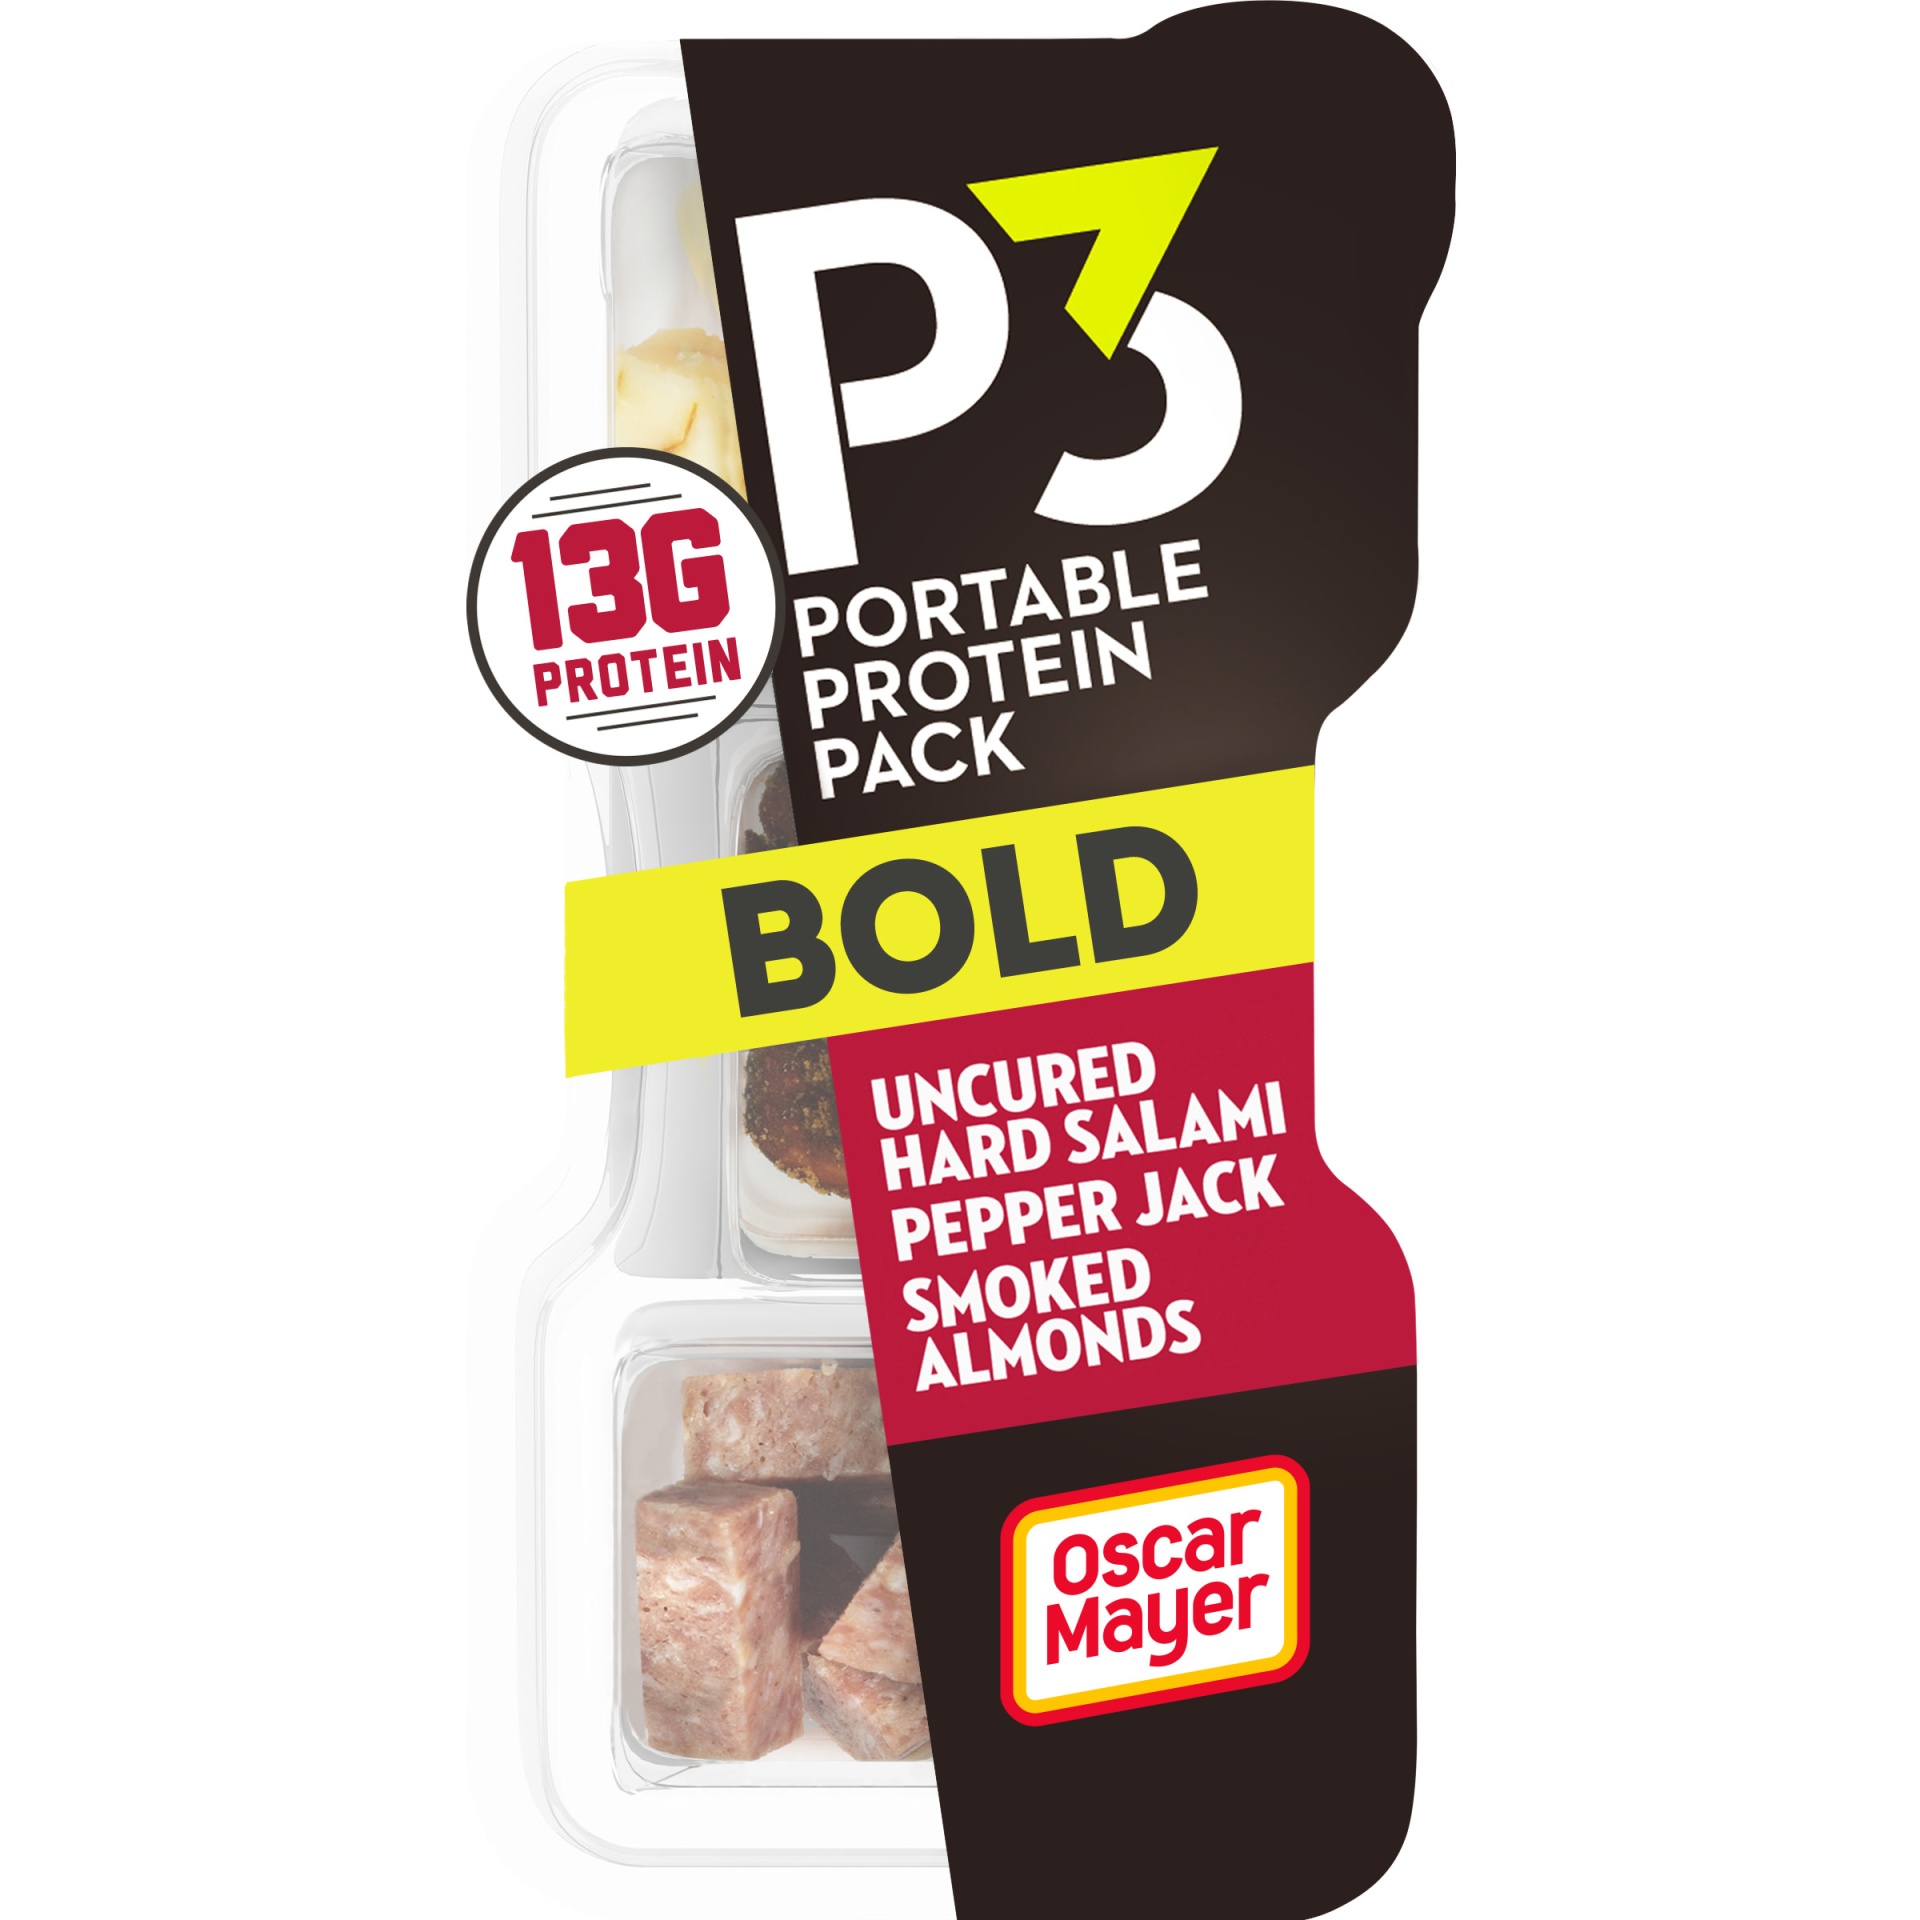 slide 1 of 1, P3 Bold Portable Protein Snack Pack with Uncured Hard Salami, Pepper Jack Cheese & Smoked Almonds Tray, 2 oz